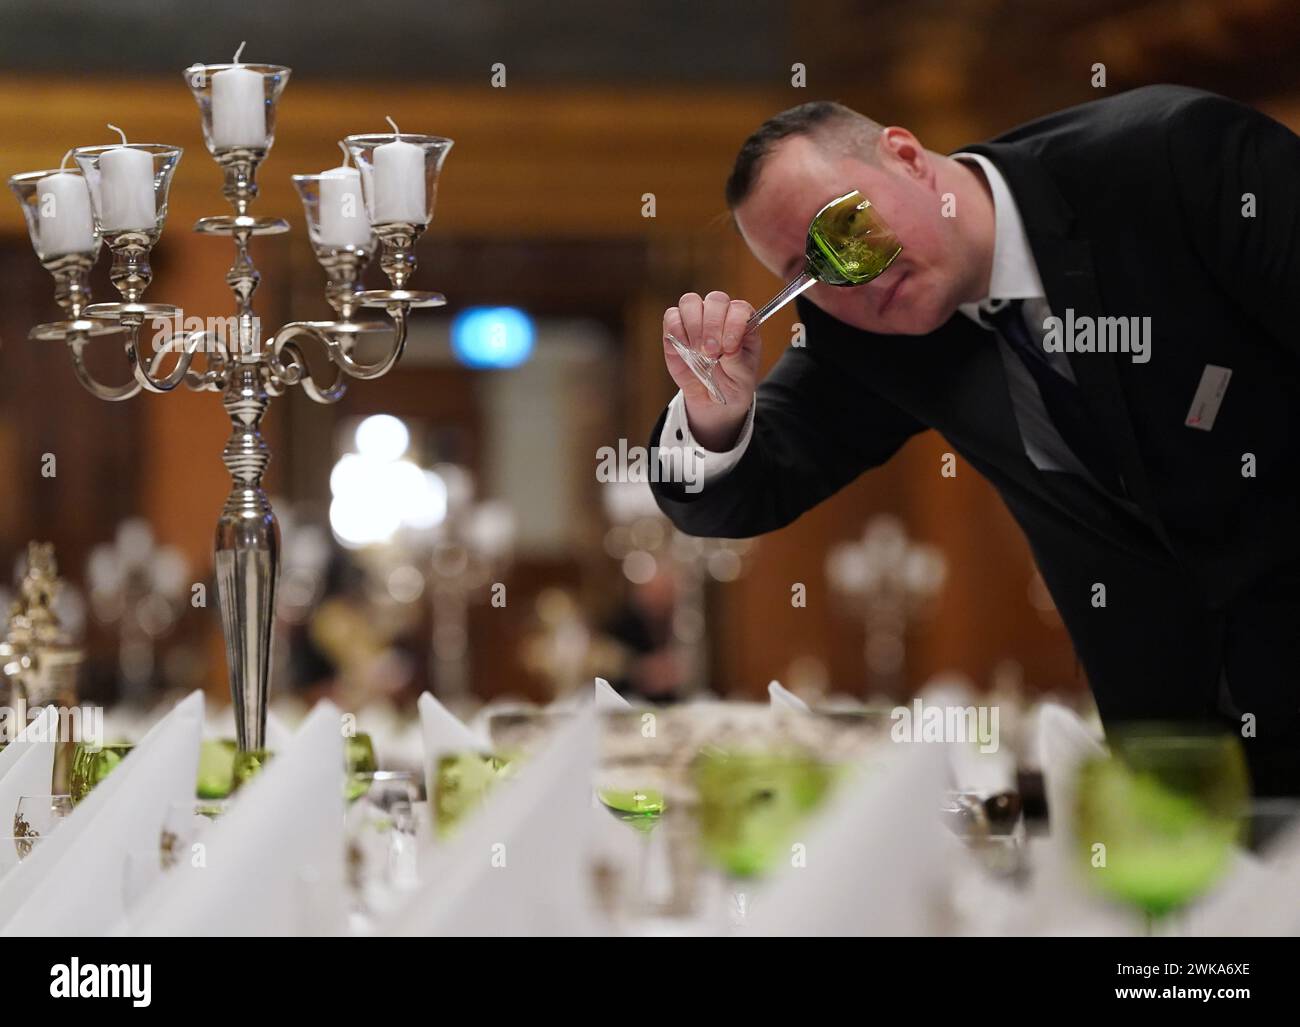 Hamburg, Germany. 19th Feb, 2024. Martin Gansen, Head of Event Services and Event Management Landesbetrieb Rathausservice, checks the glasses during the final preparations for the traditional Matthiae meal of the Hamburg Senate in the large banquet hall in City Hall. The Prime Minister of the Republic of Estonia Kallas and Federal Chancellor Scholz are expected to attend the Matthiae meal as guests of honor. The Matthiae banquet is considered to be the oldest still celebrated banquet in the world. Credit: Marcus Brandt/dpa/Alamy Live News Stock Photo